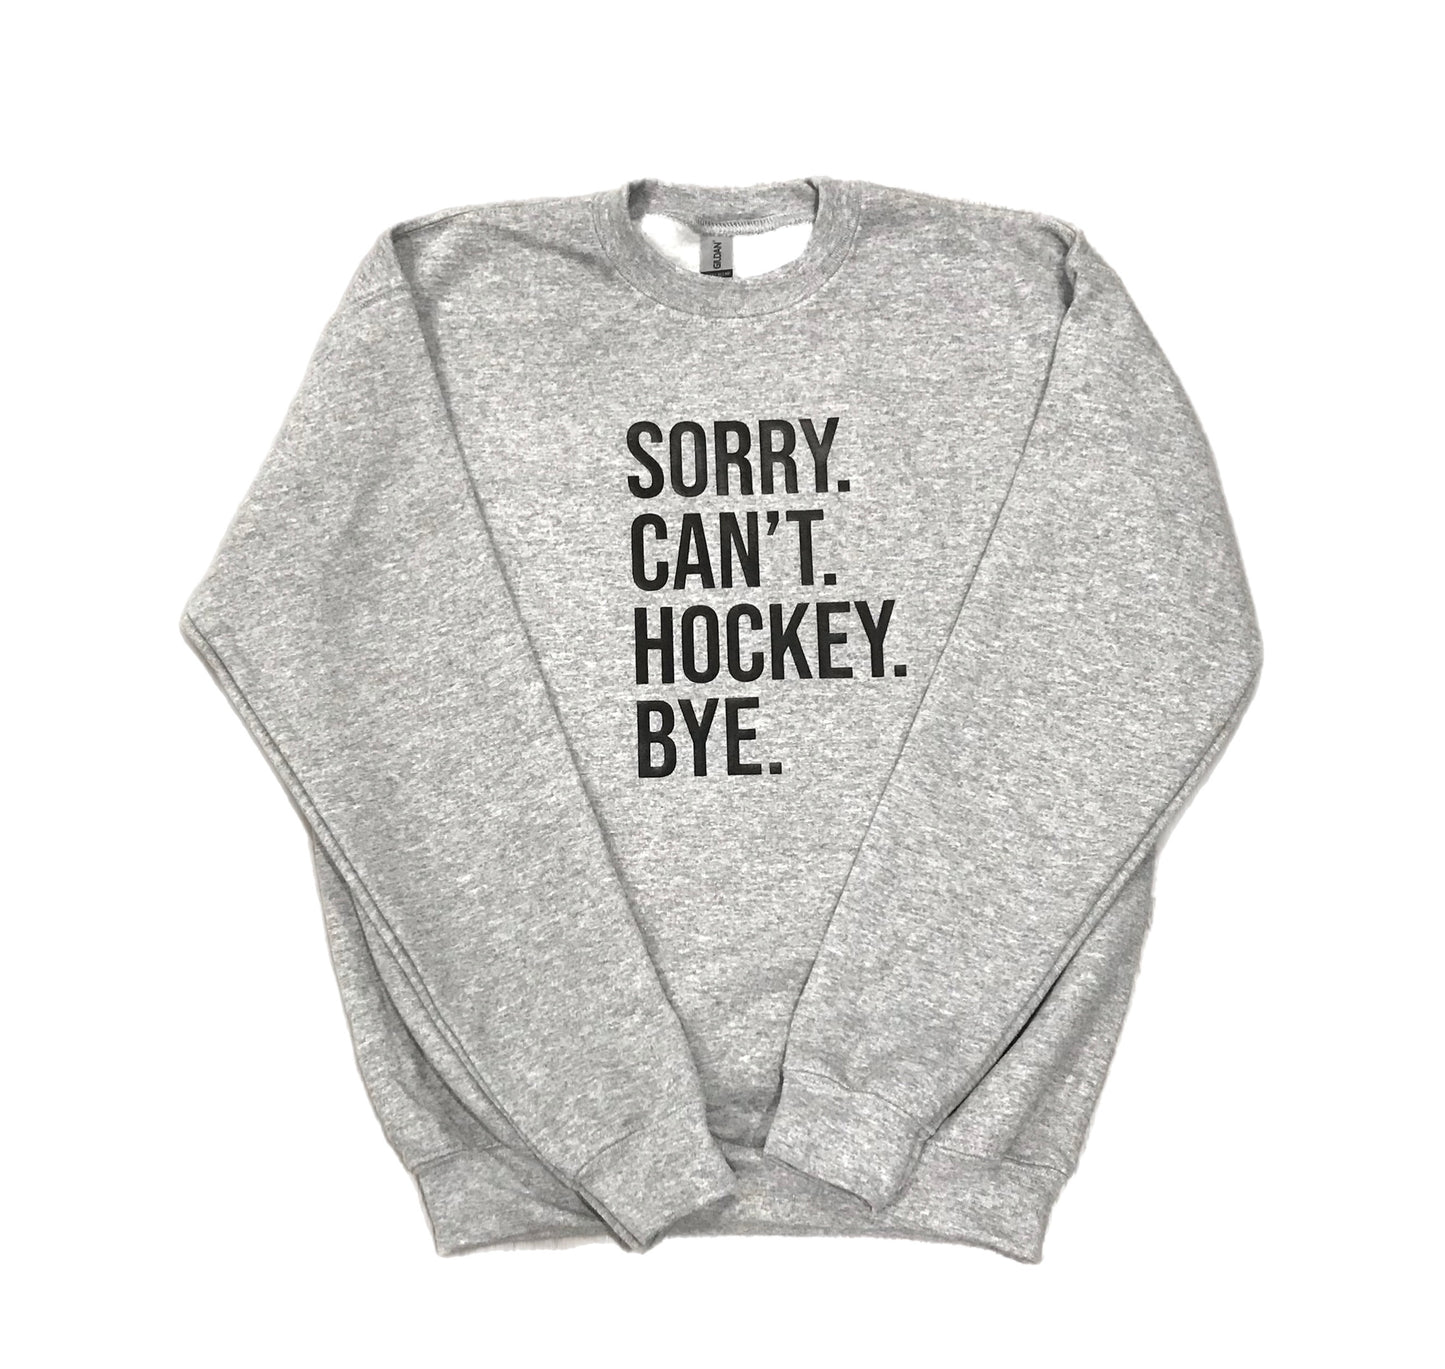 Youth sizes - Sorry Can’t Hockey Bye.